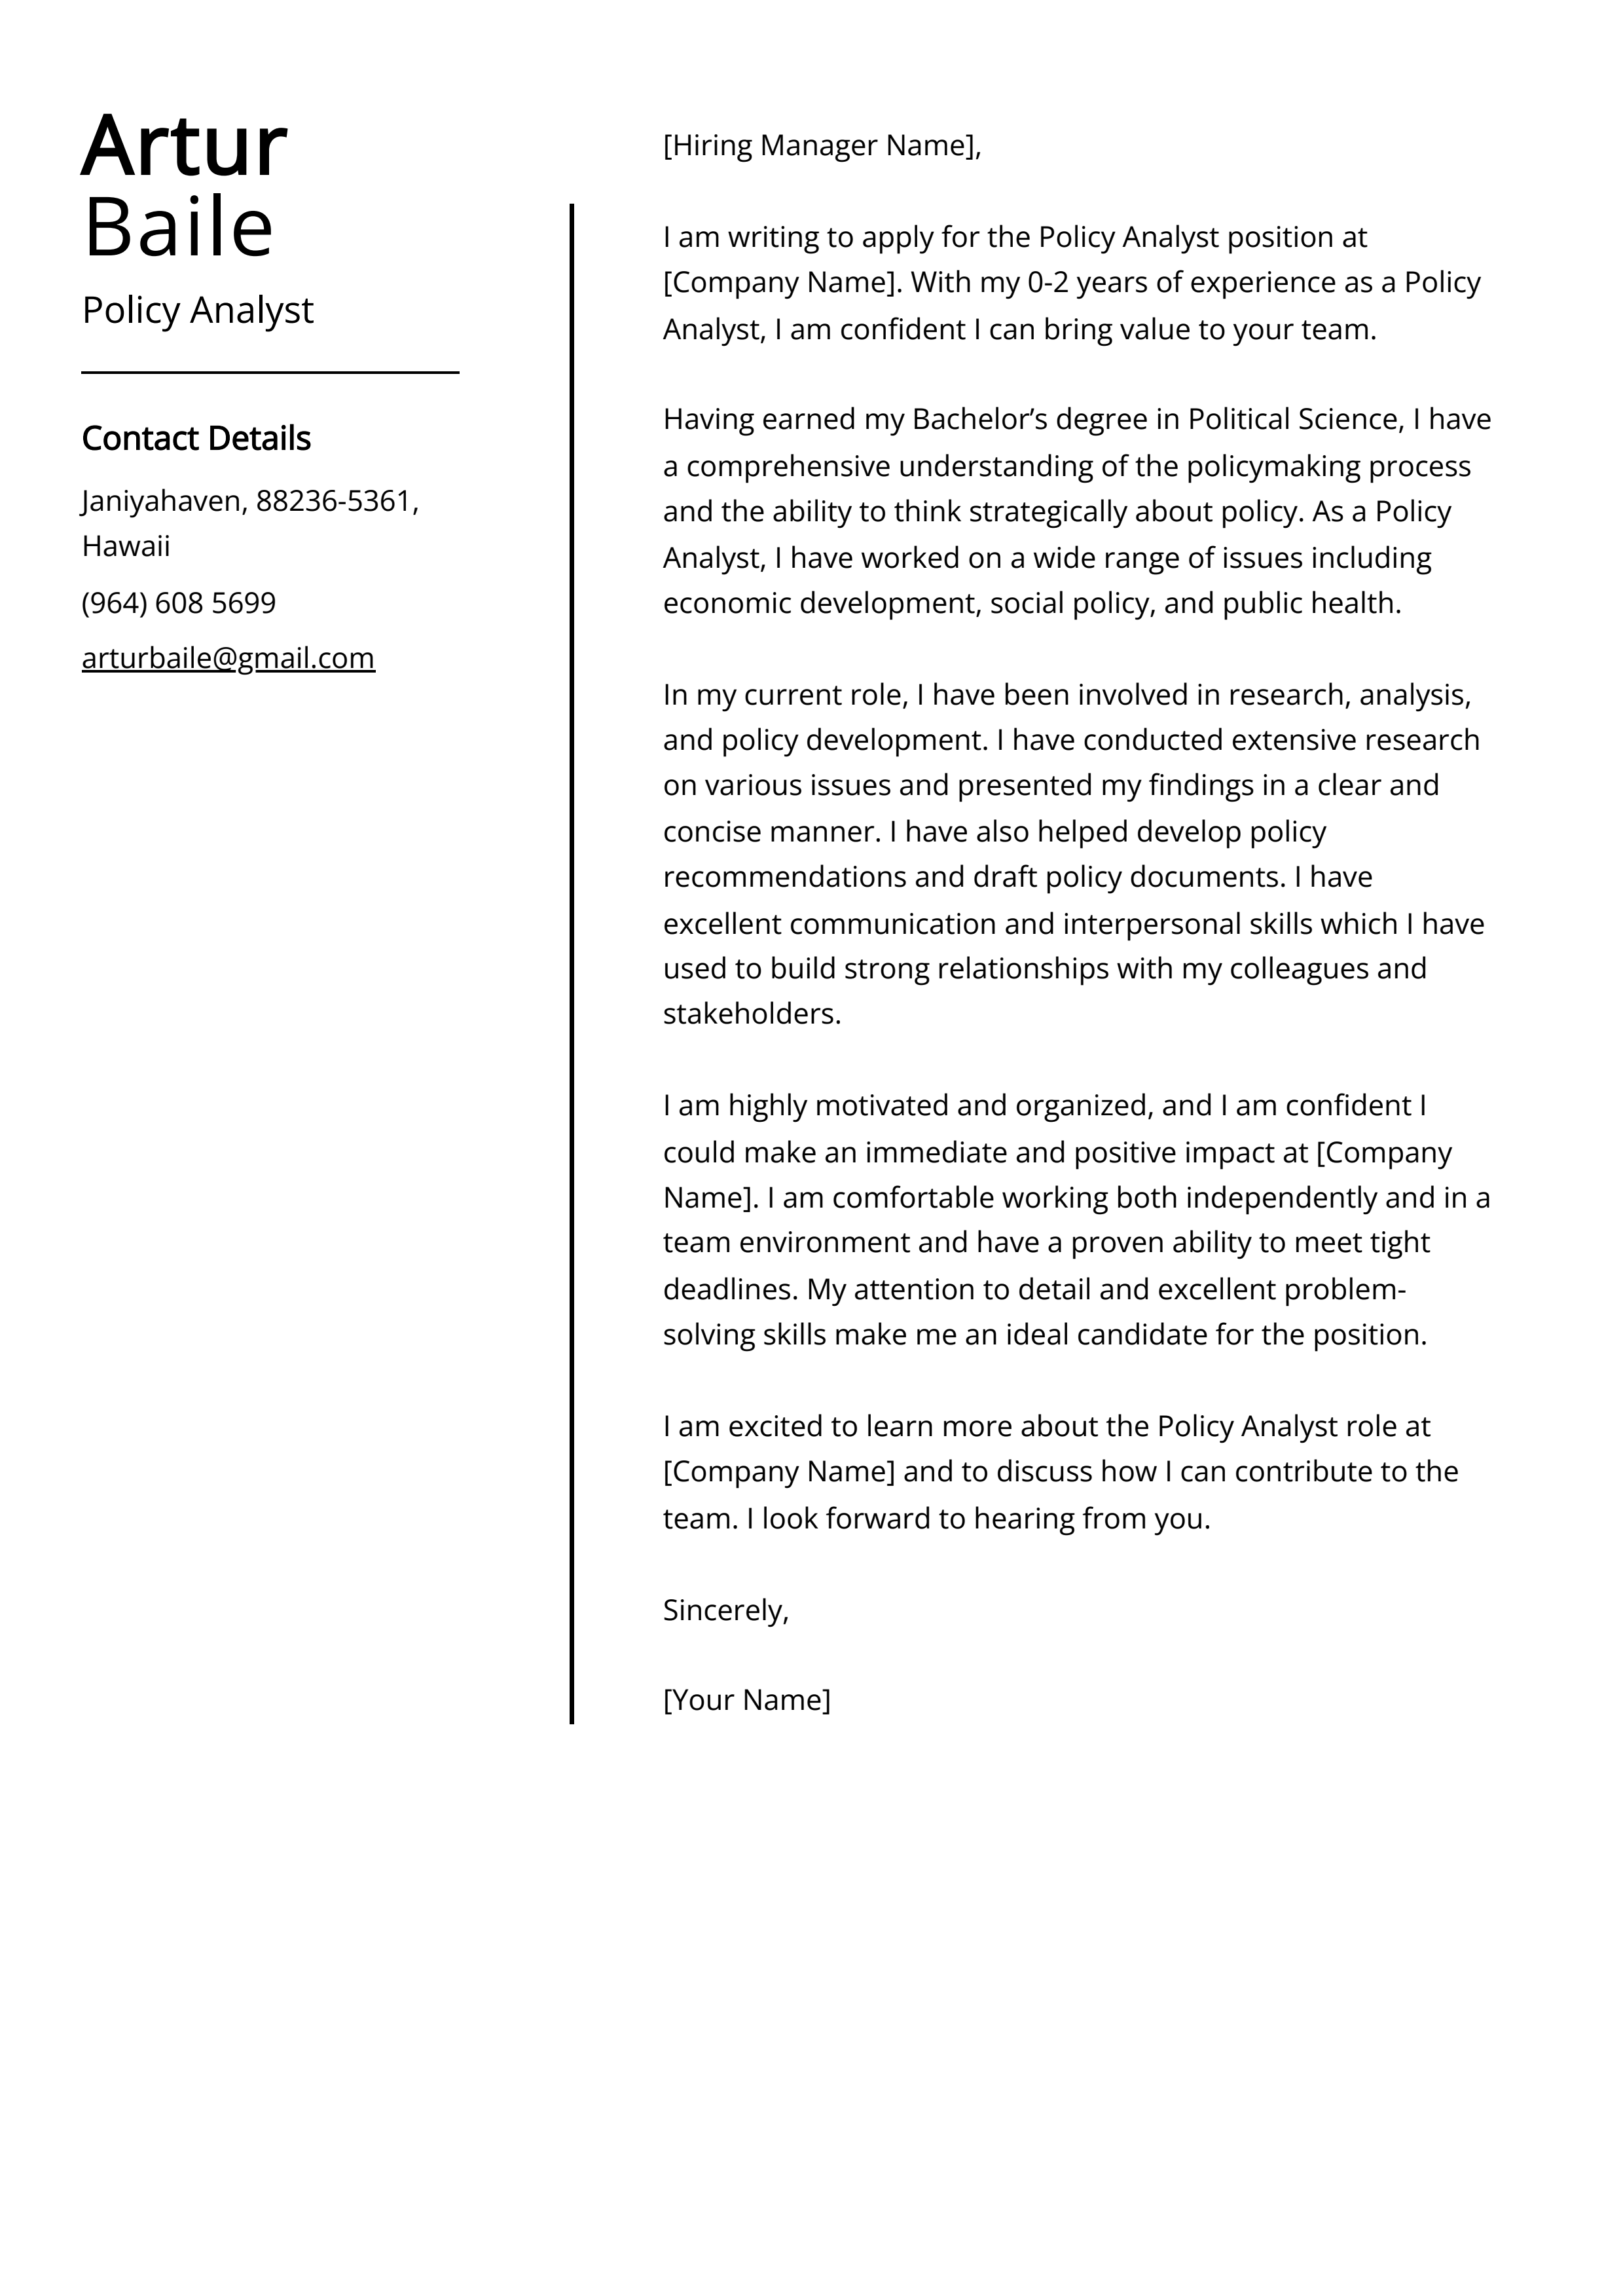 Policy Analyst Cover Letter Example